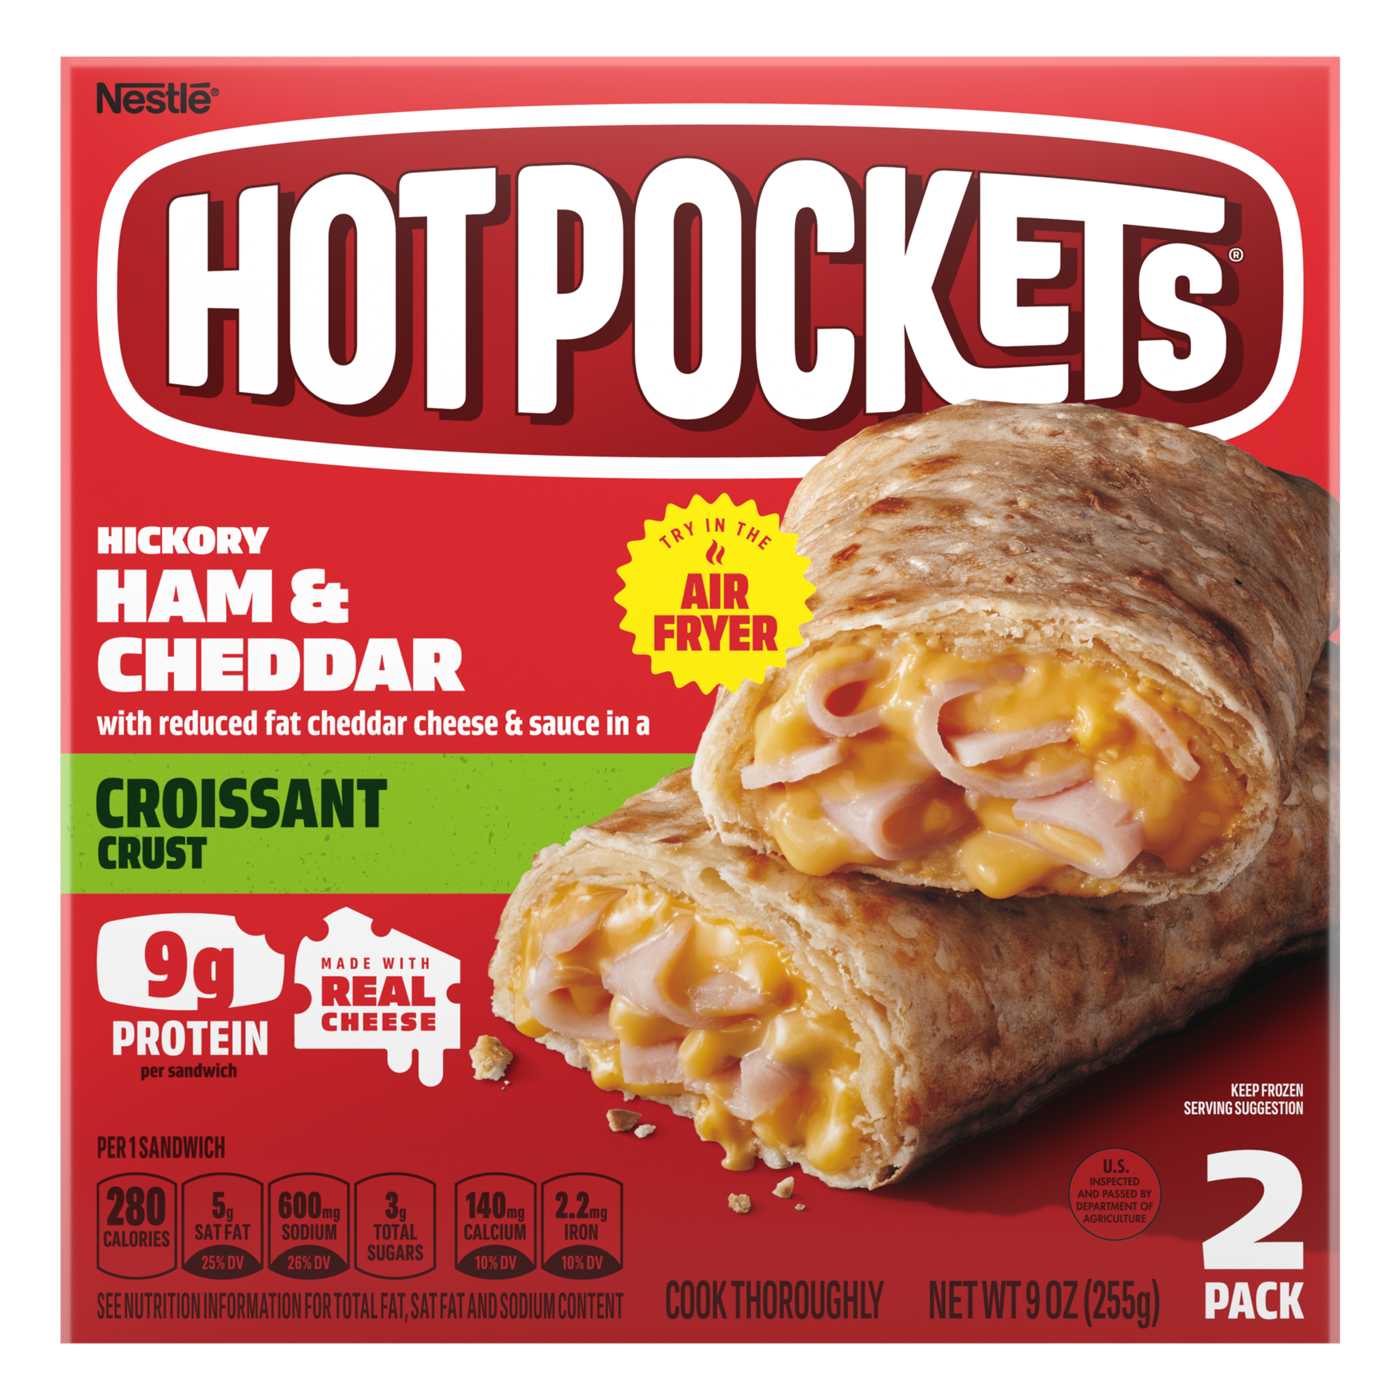 Hot Pockets Hickory Ham & Cheddar Frozen Sandwiches - Croissant Crust; image 1 of 5